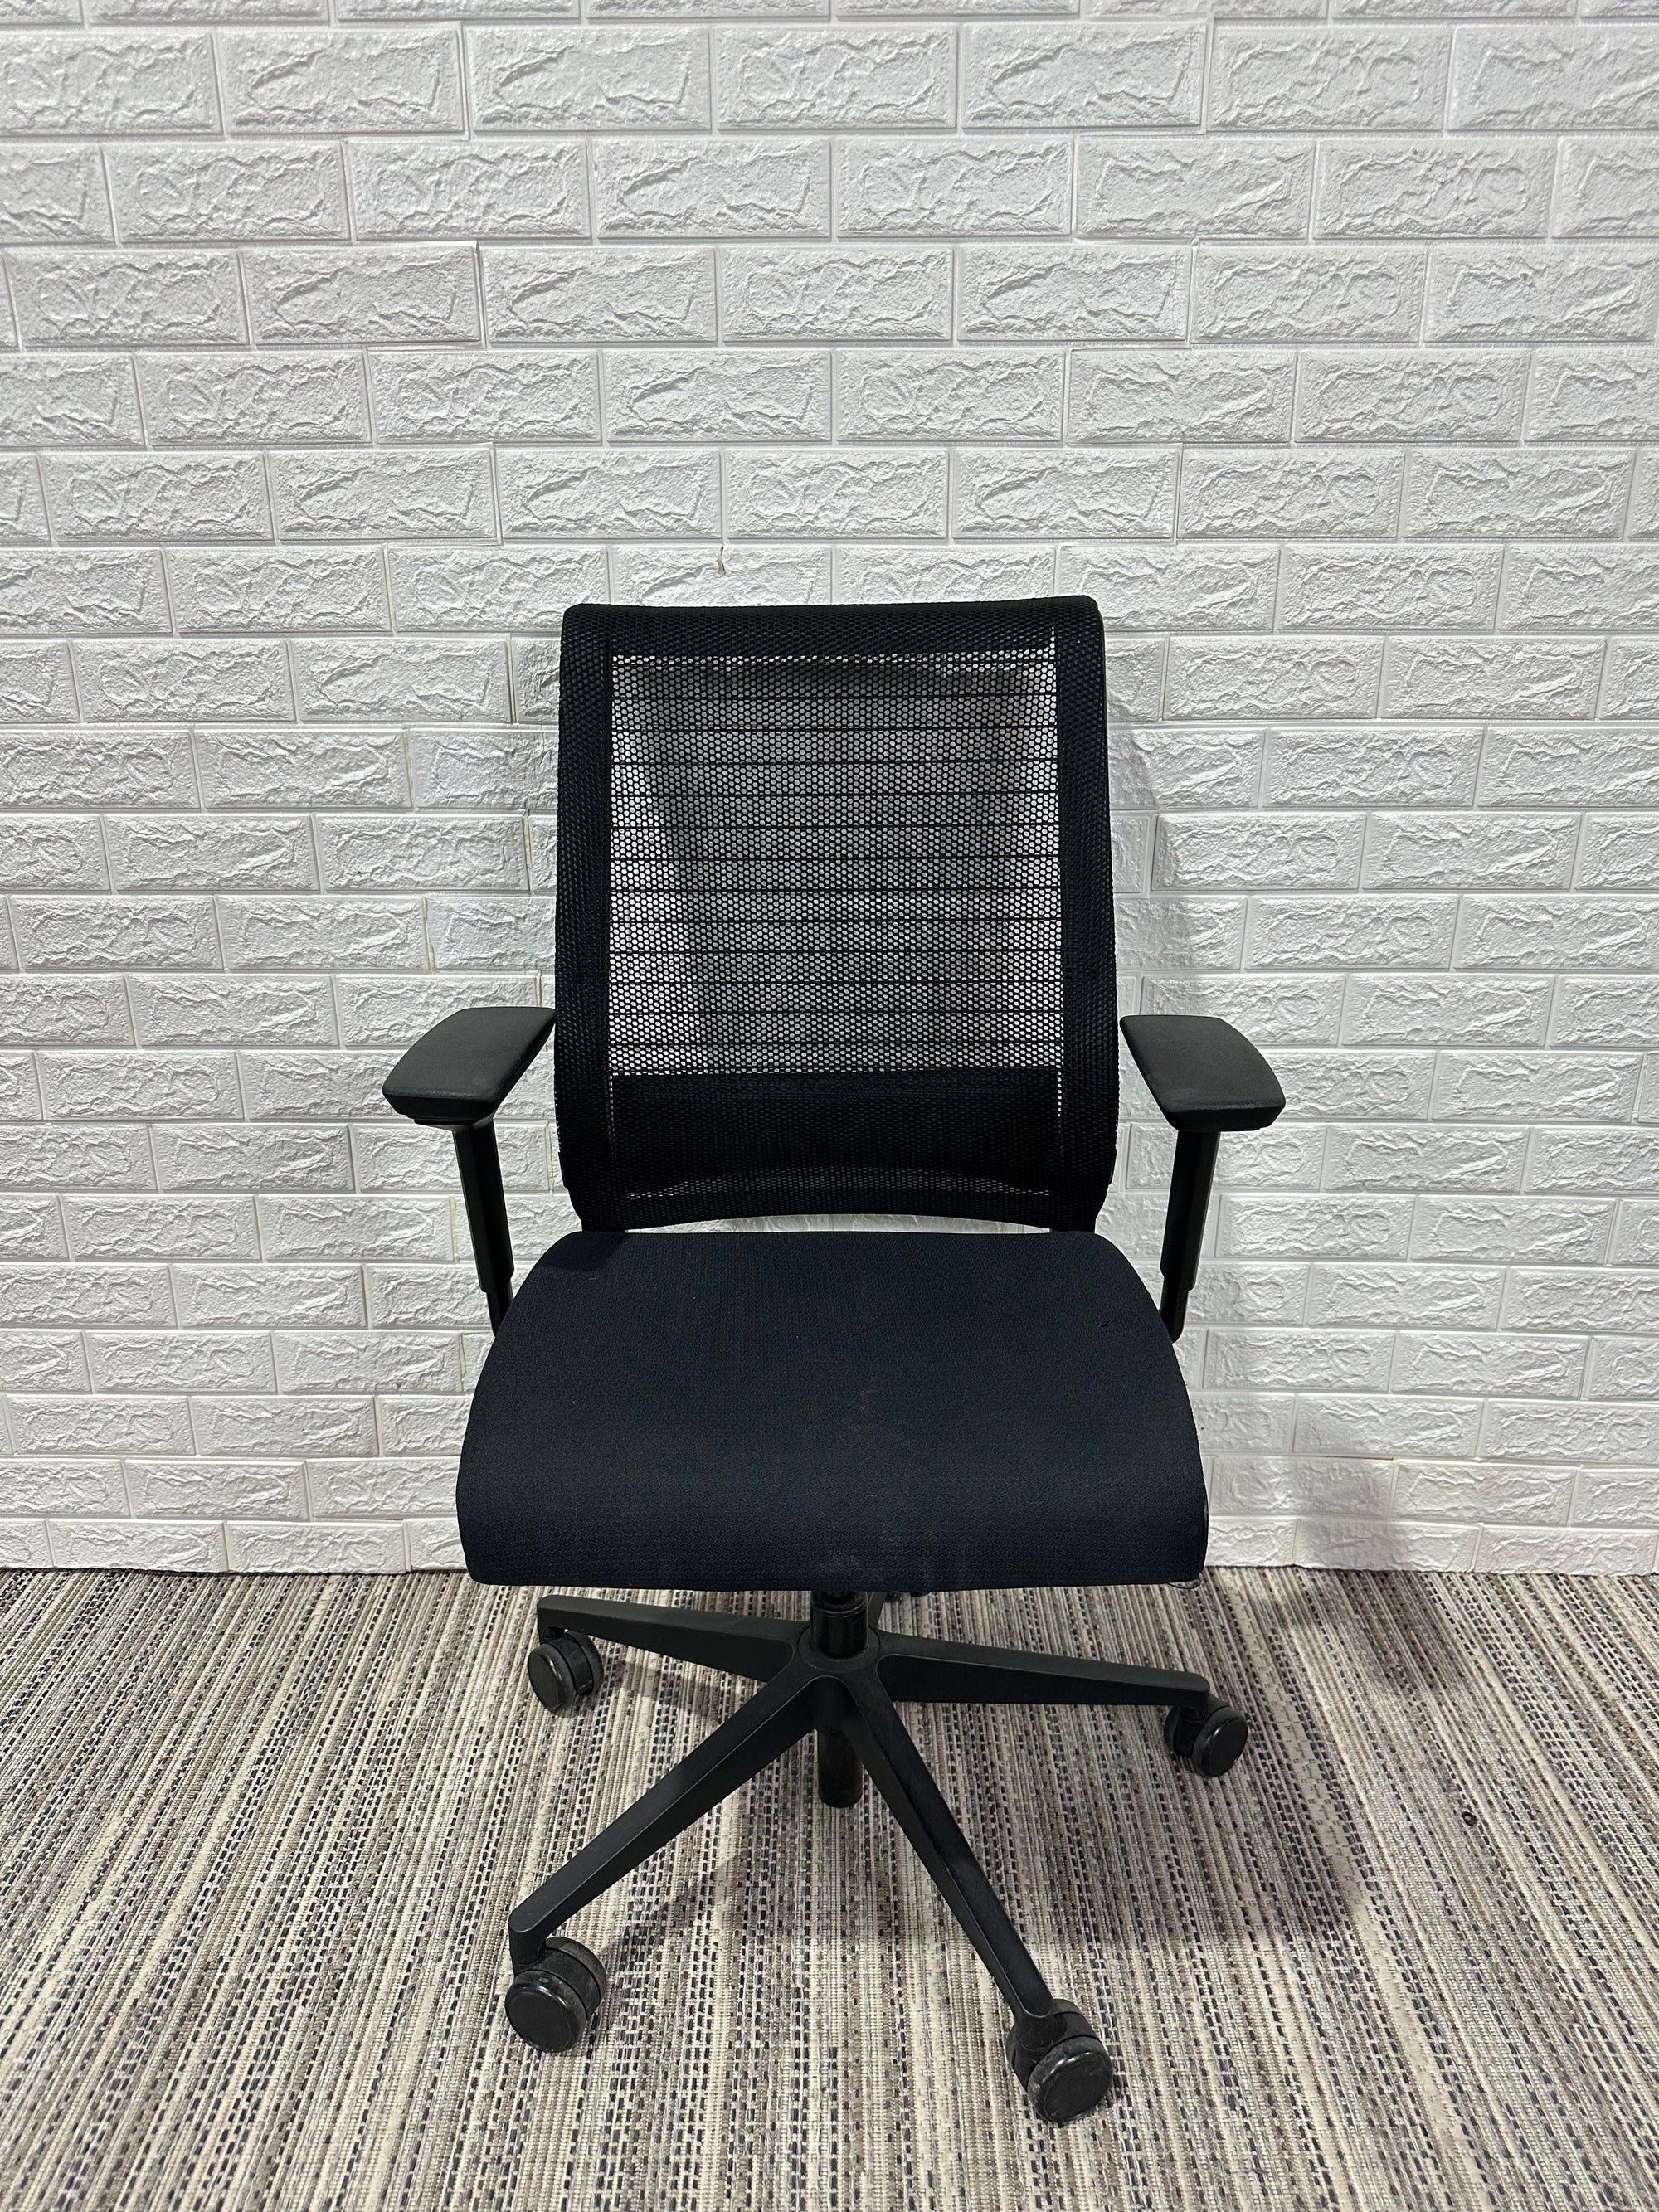 Pre-Owned Steelcase Black Think Chair with Black Mesh - Duckys Office Furniture